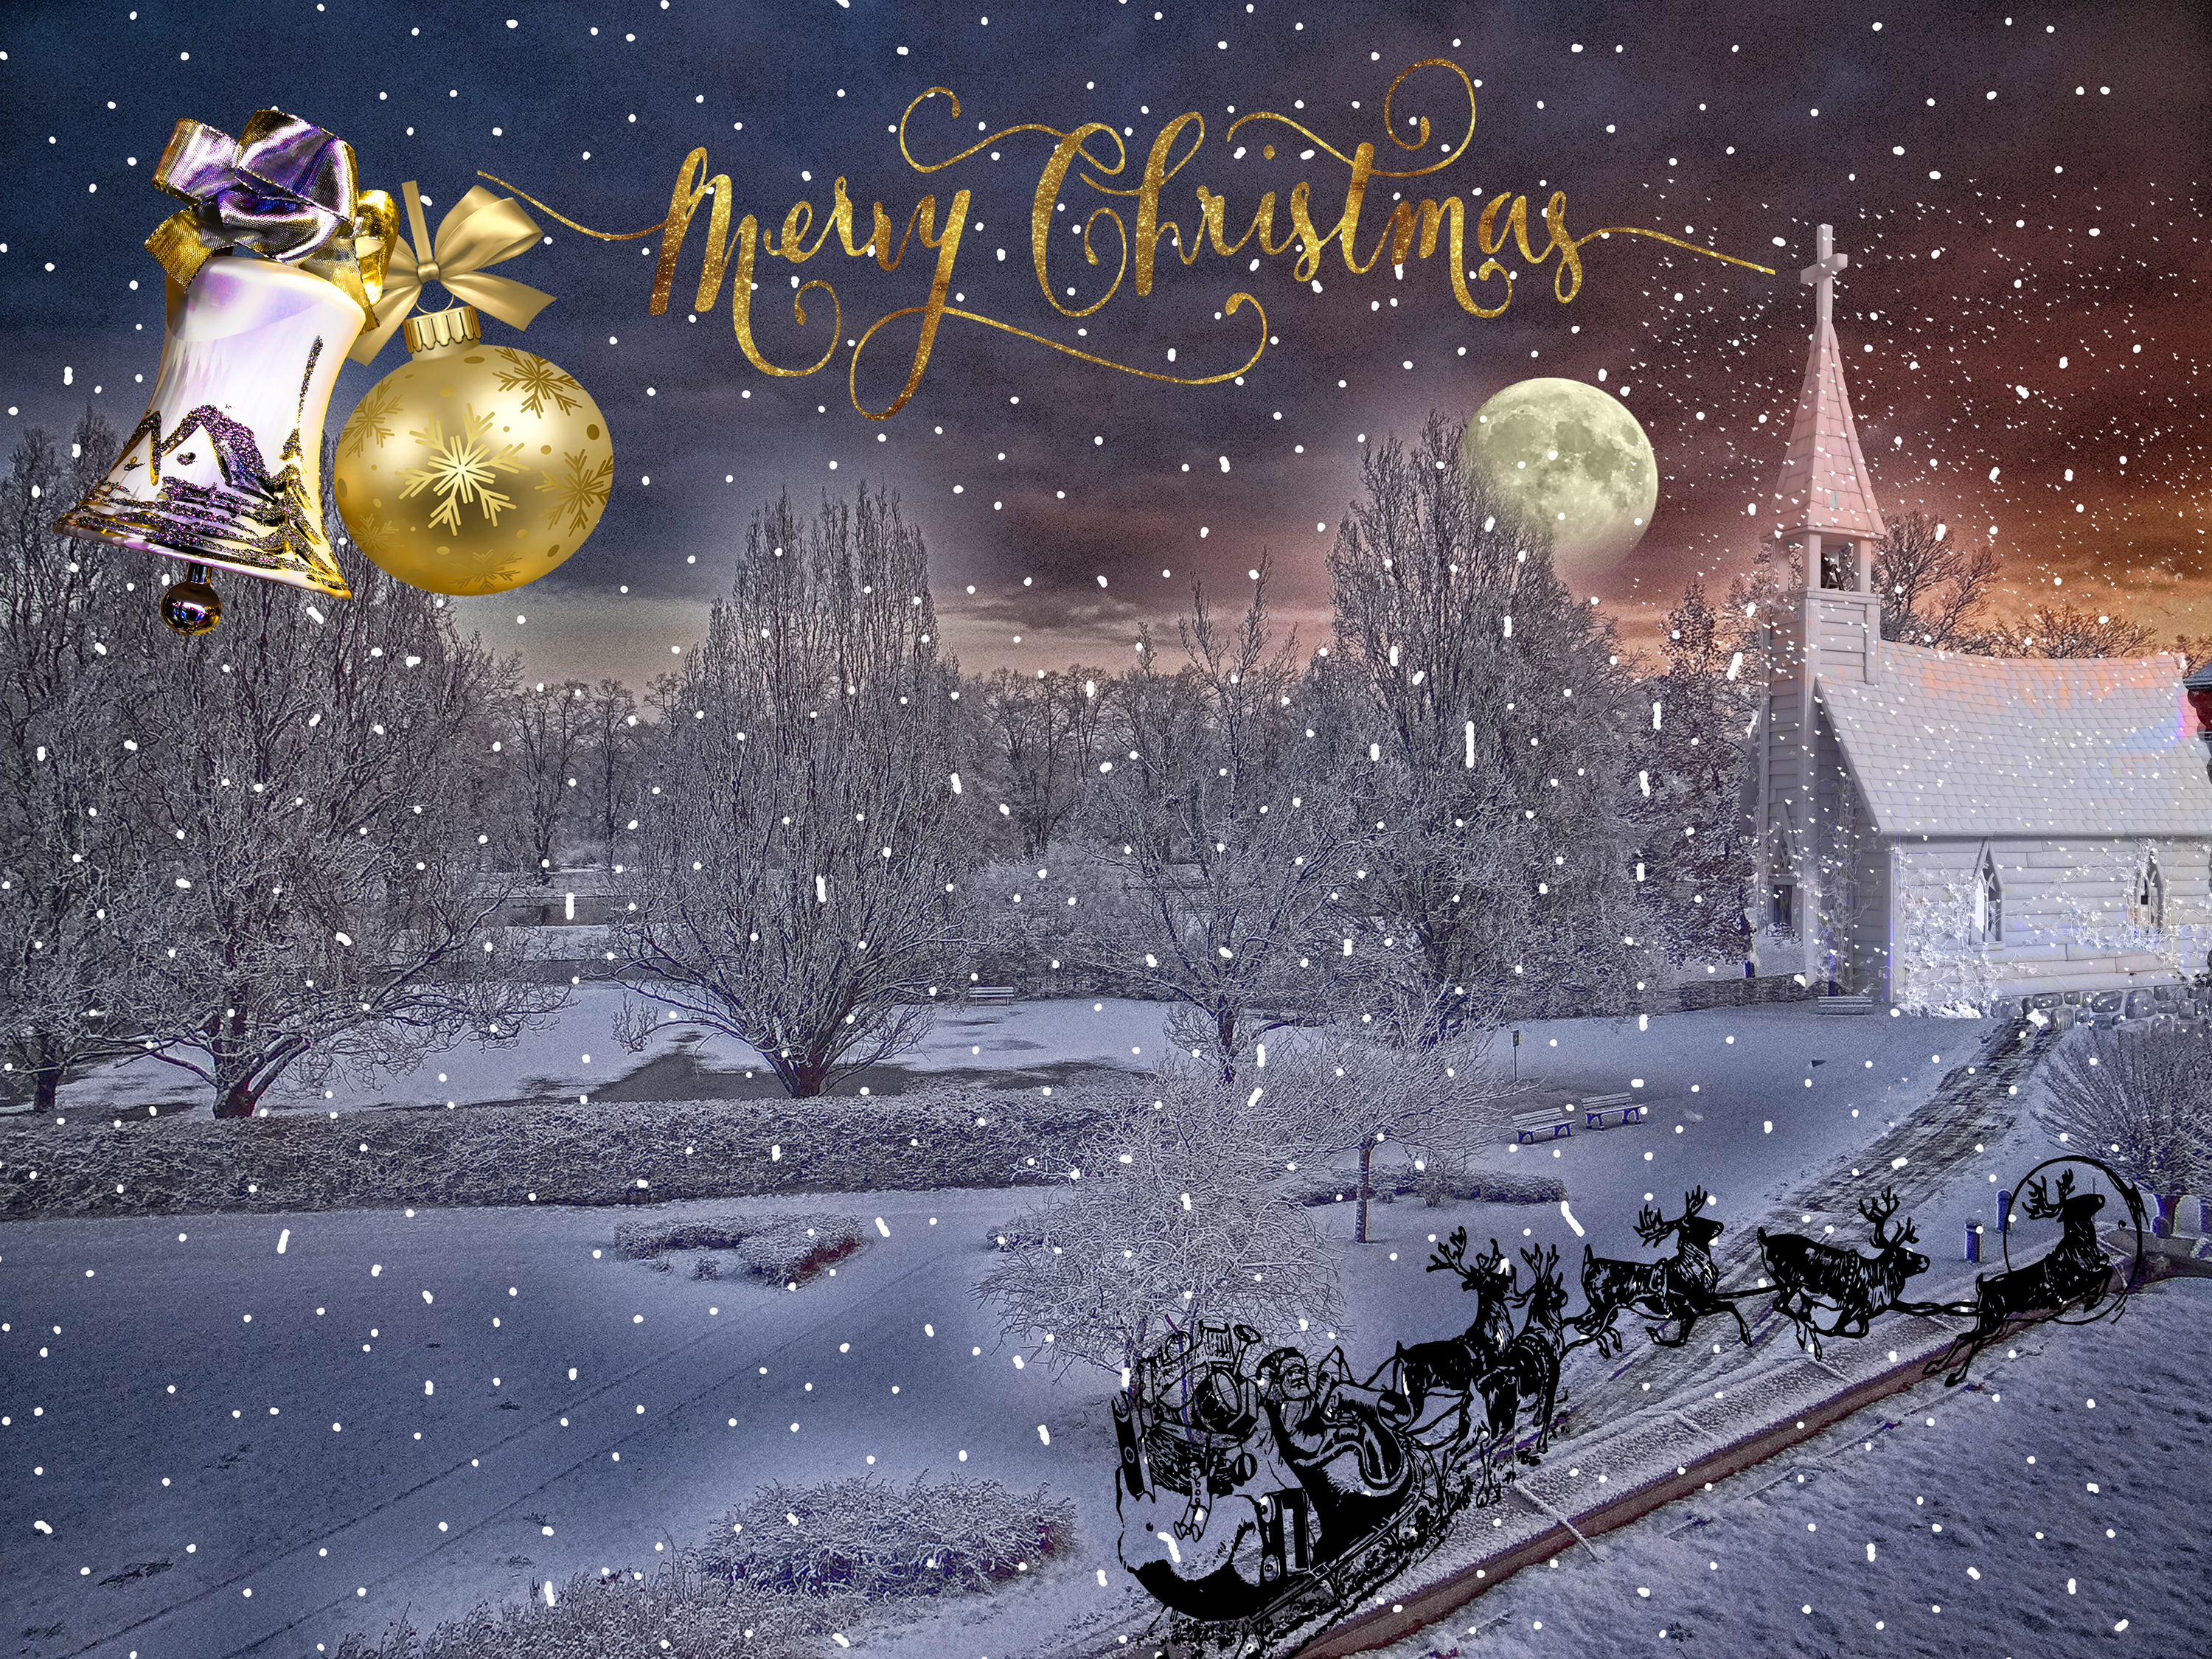 holiday, christmas, bauble, bell, church, merry christmas, moon, reindeer, sled, snow, winter